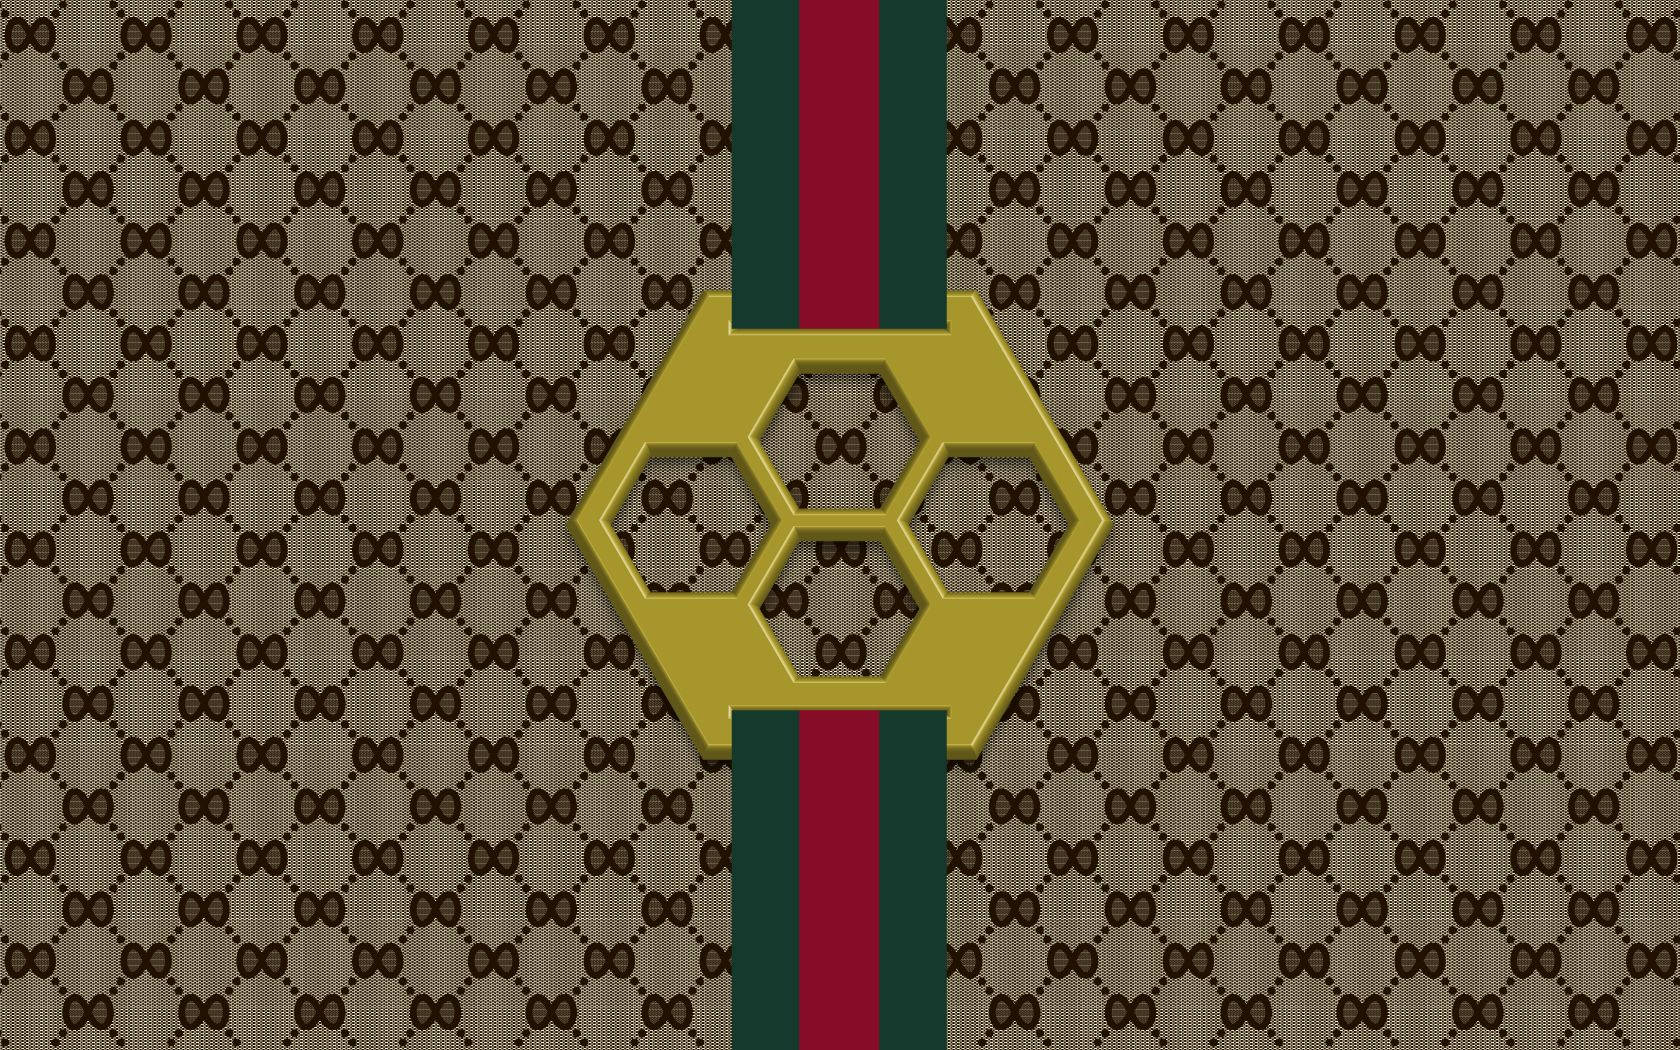 Show Off Your Sense of Style With Gucci Wallpaper